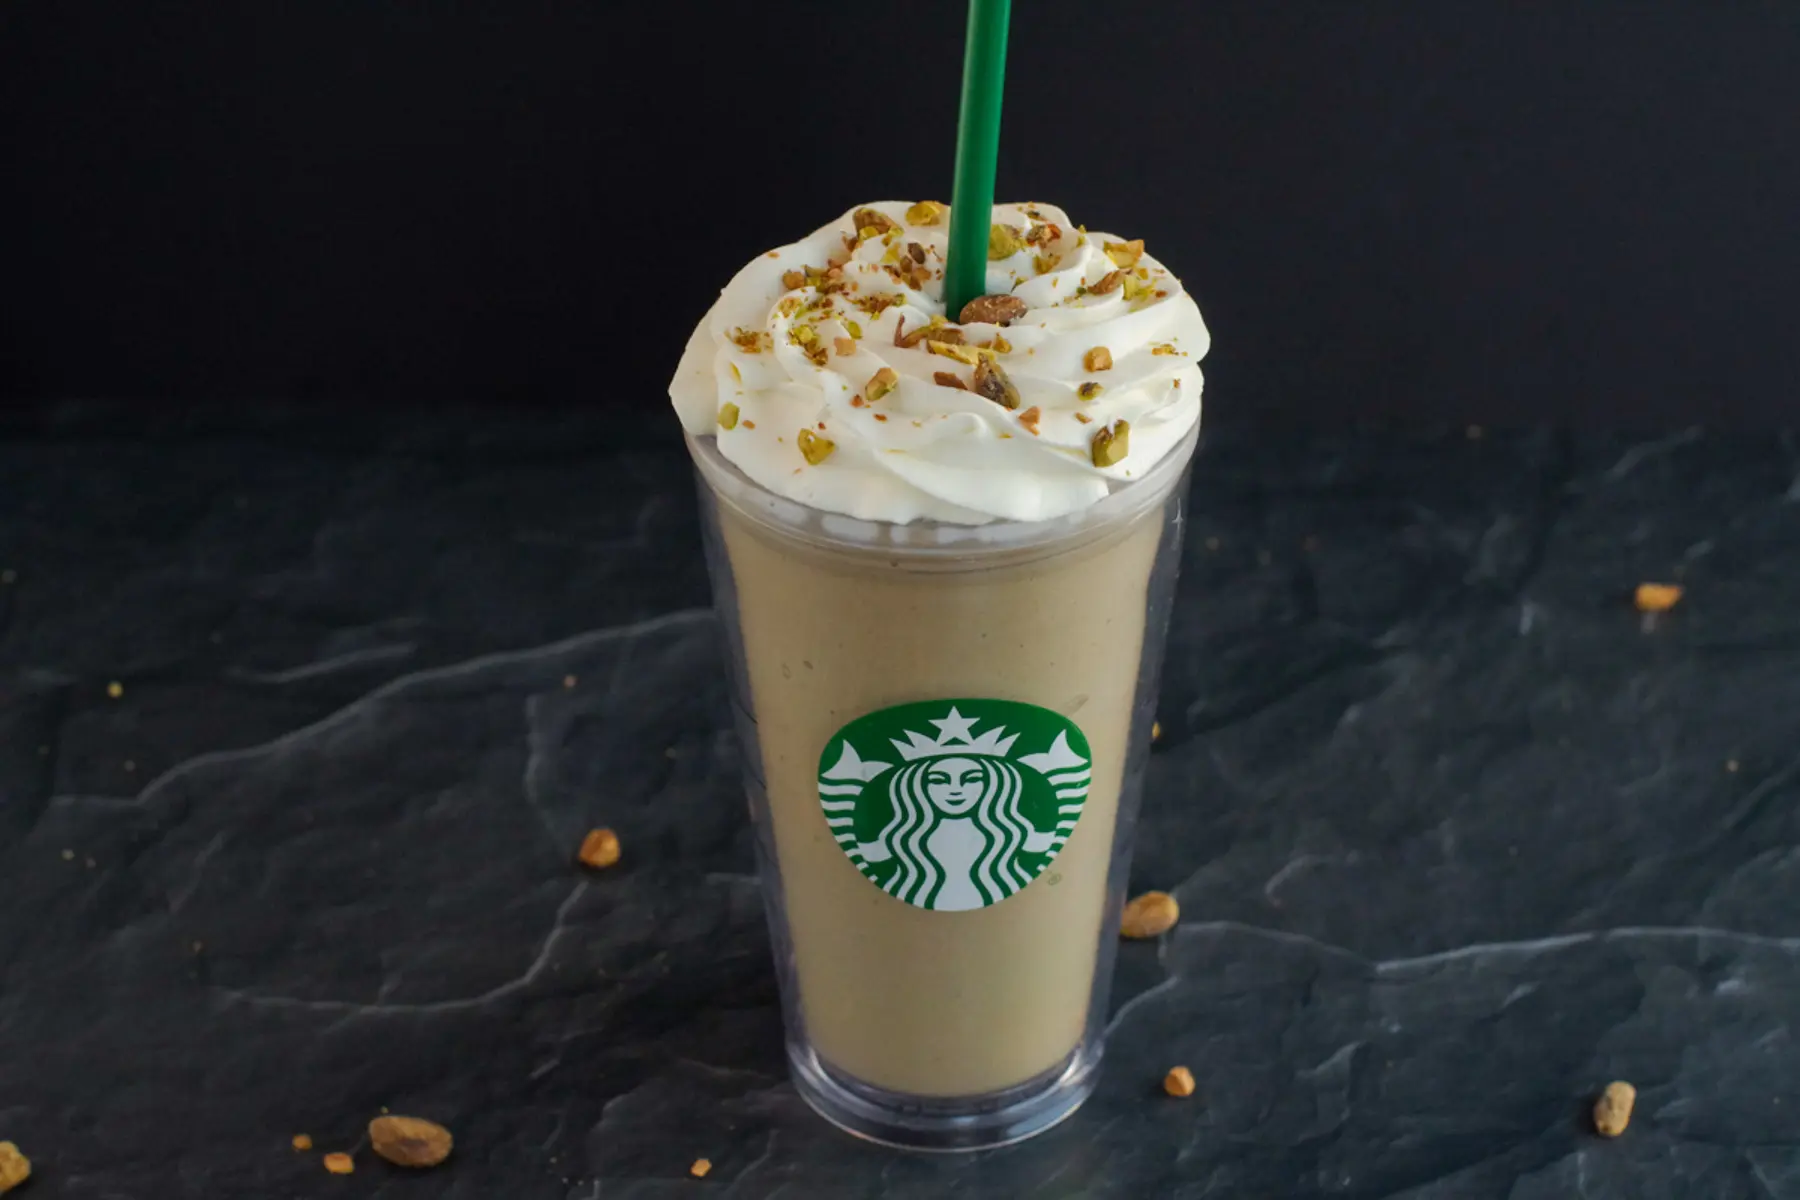 Pistachio Frappuccino in Starbucks cup on black surface with pistachios around